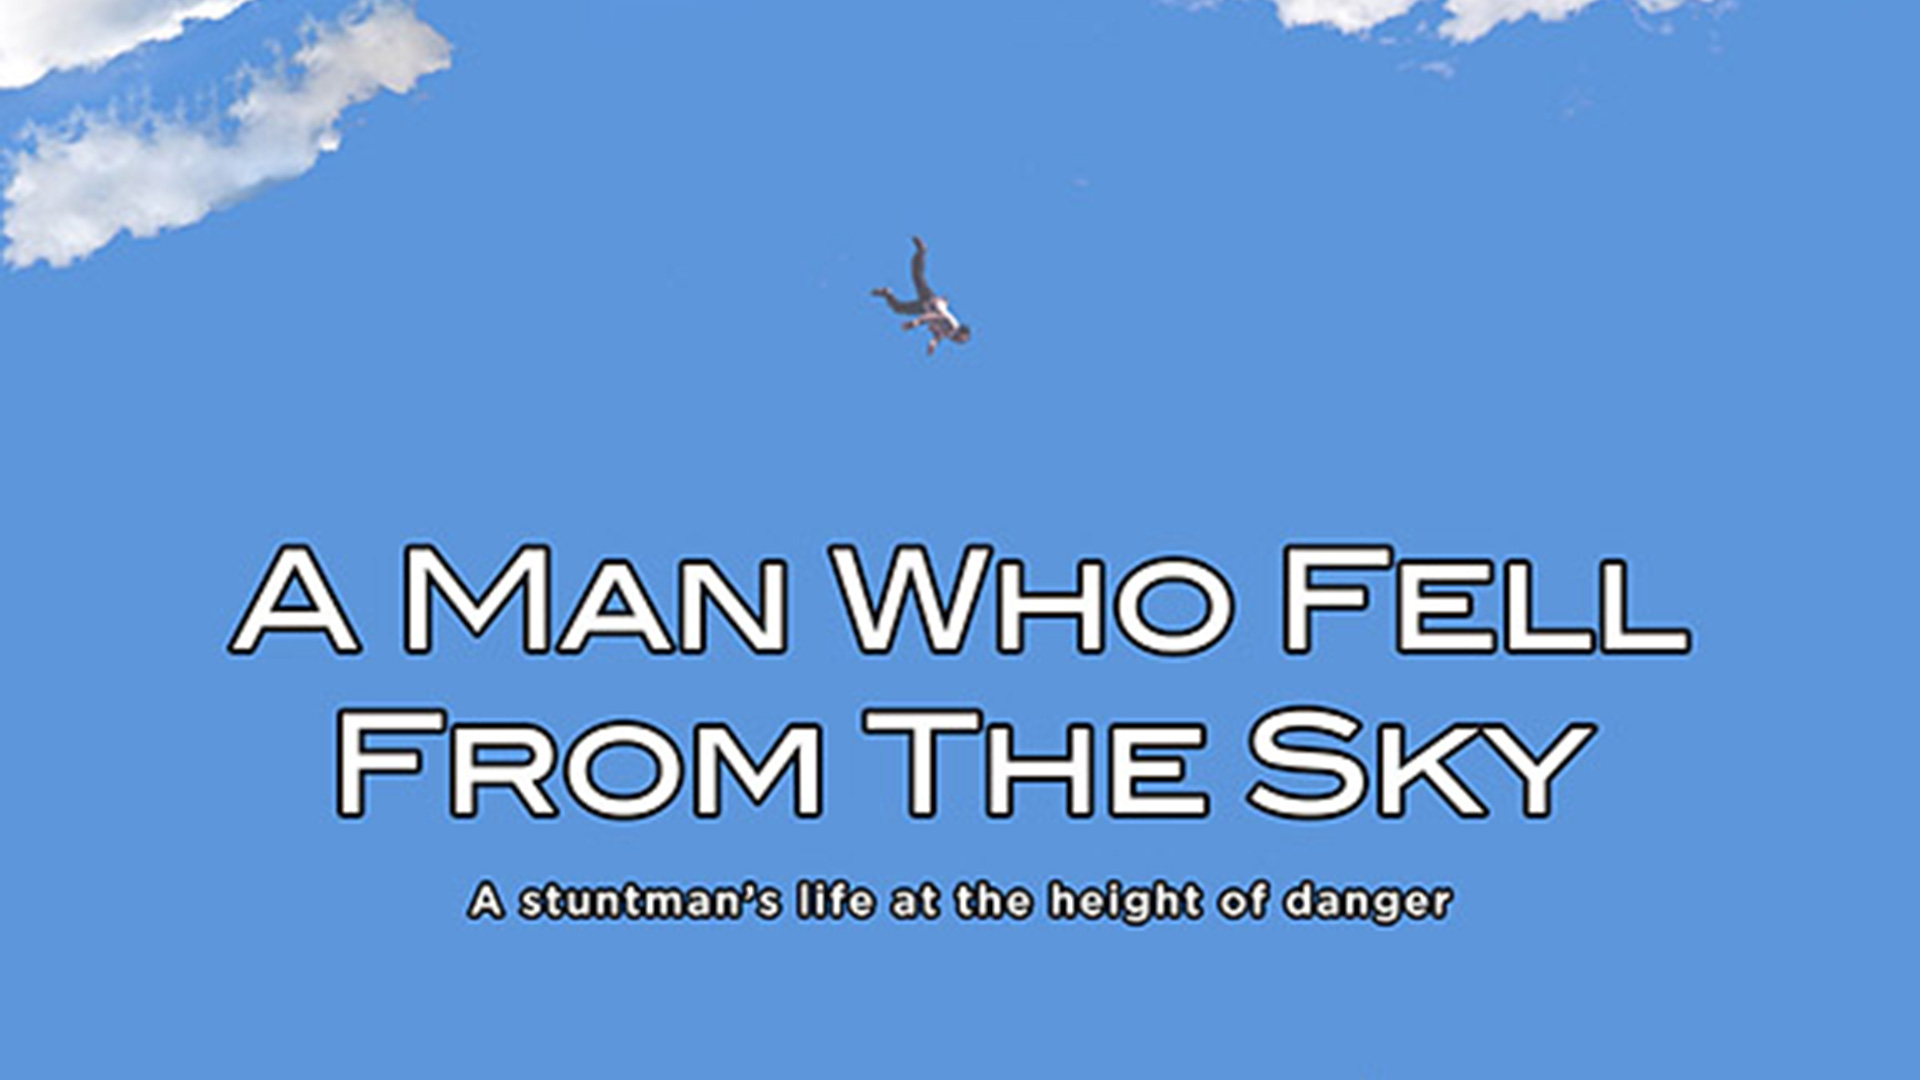 A Man Who Fell from the Sky